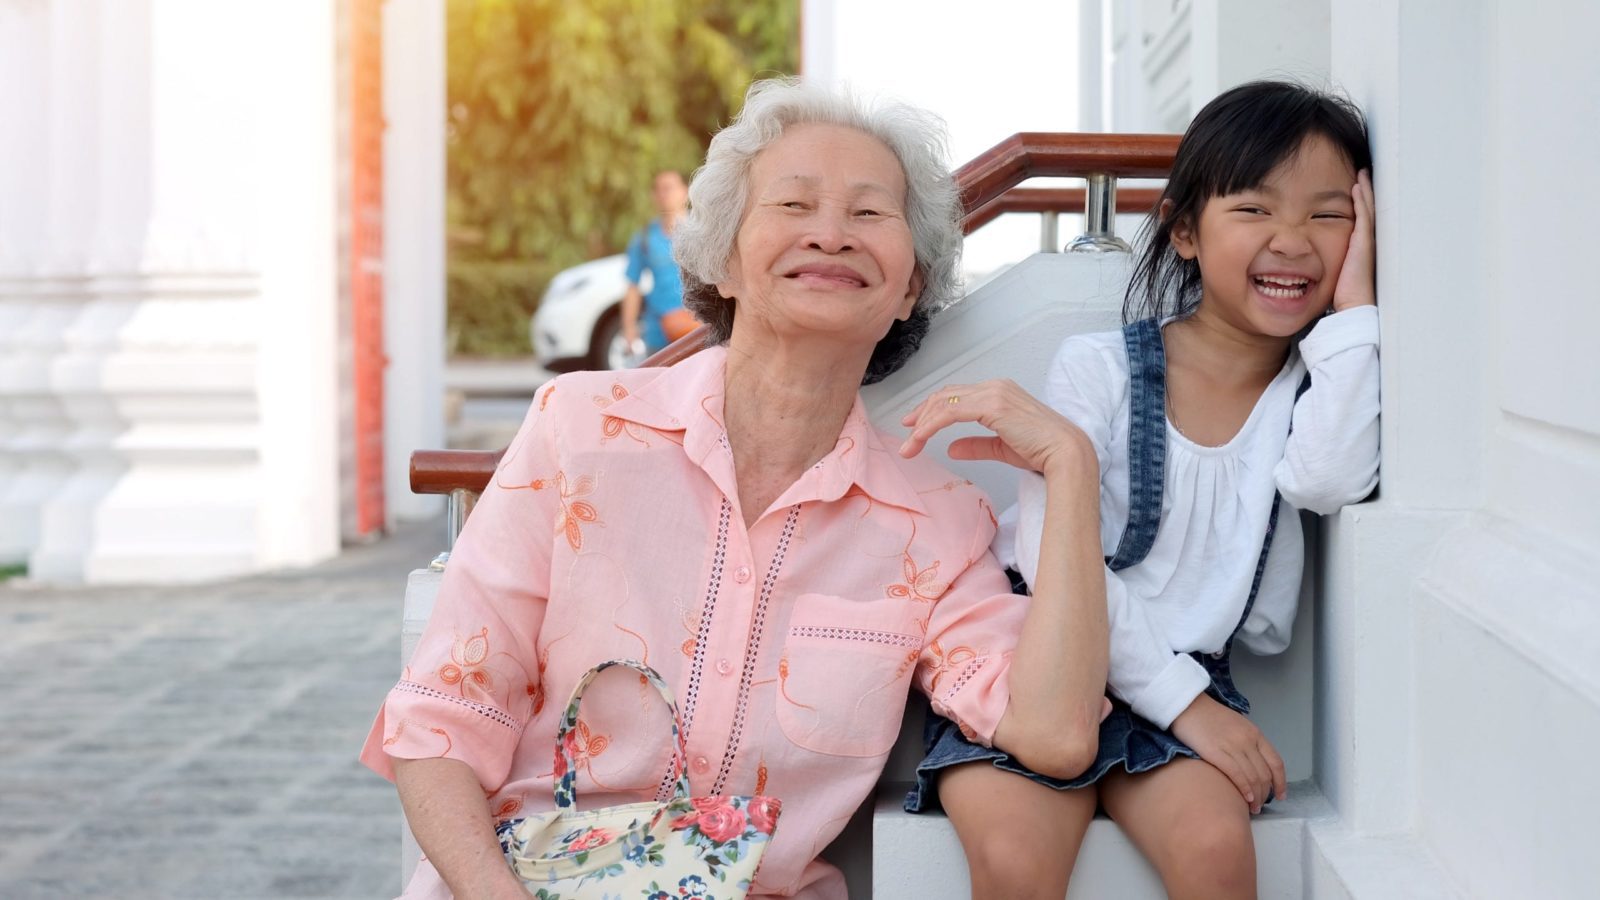 girl on a multi-gen vacation with her grandmother, laughing